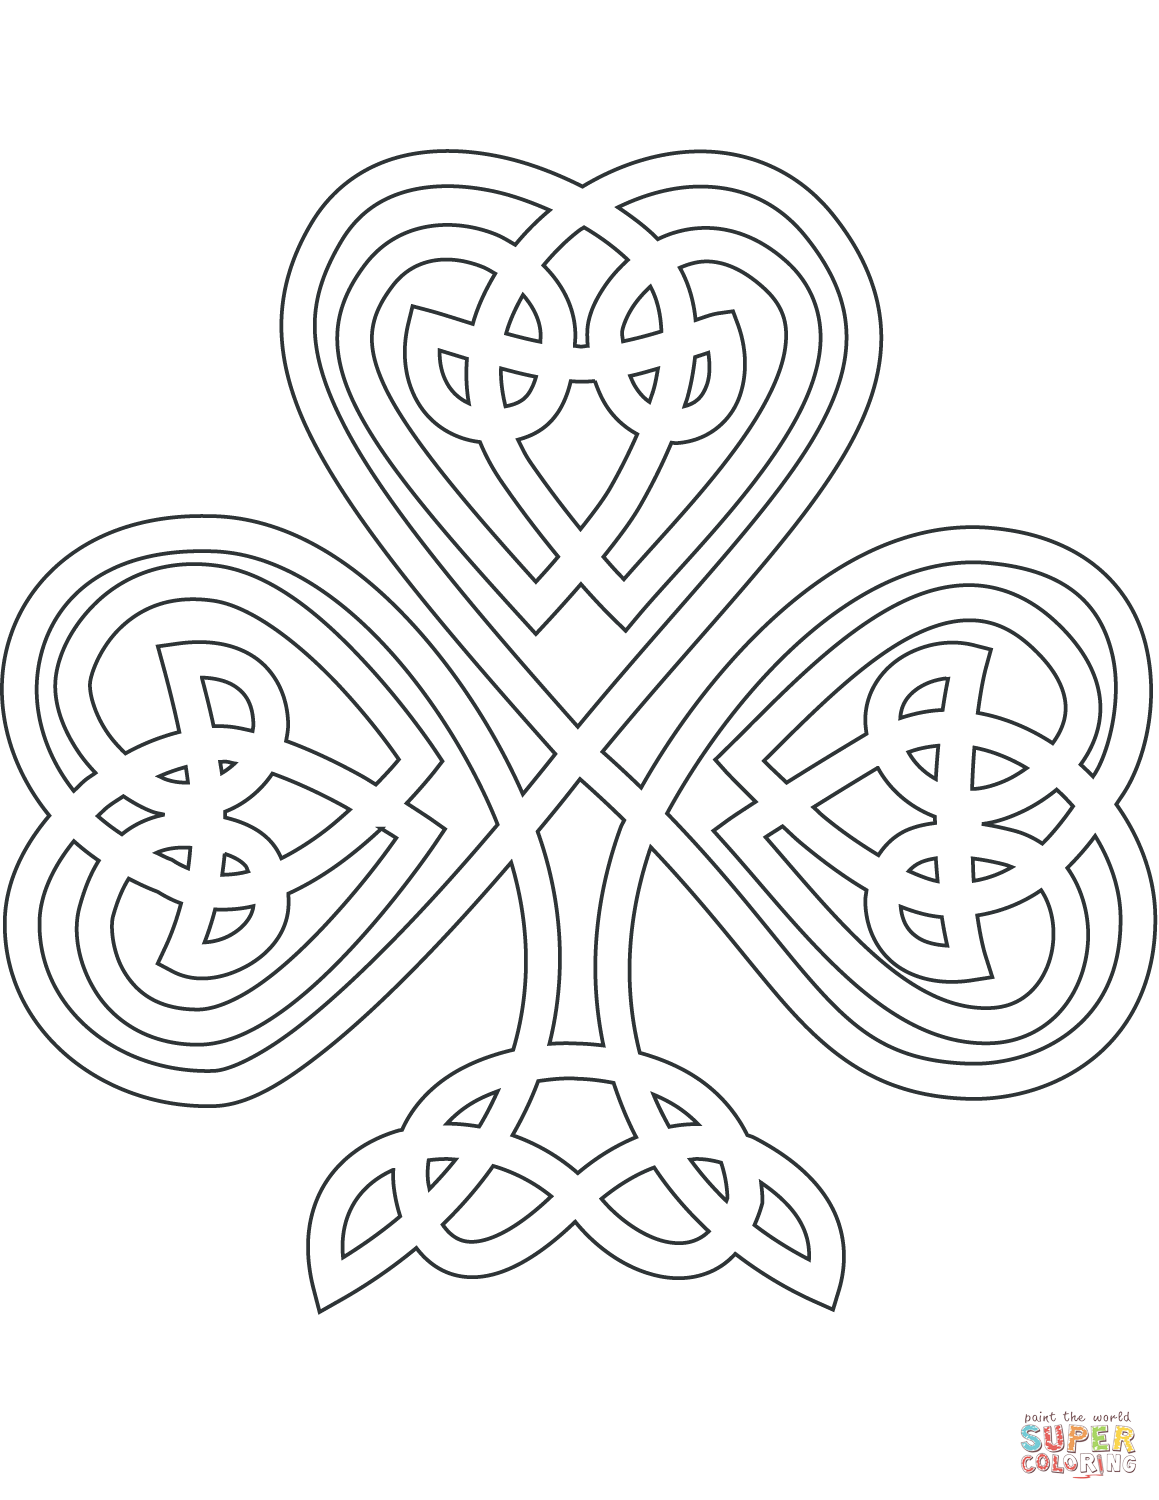 Celtic style shamrock coloring page free printable coloring pages